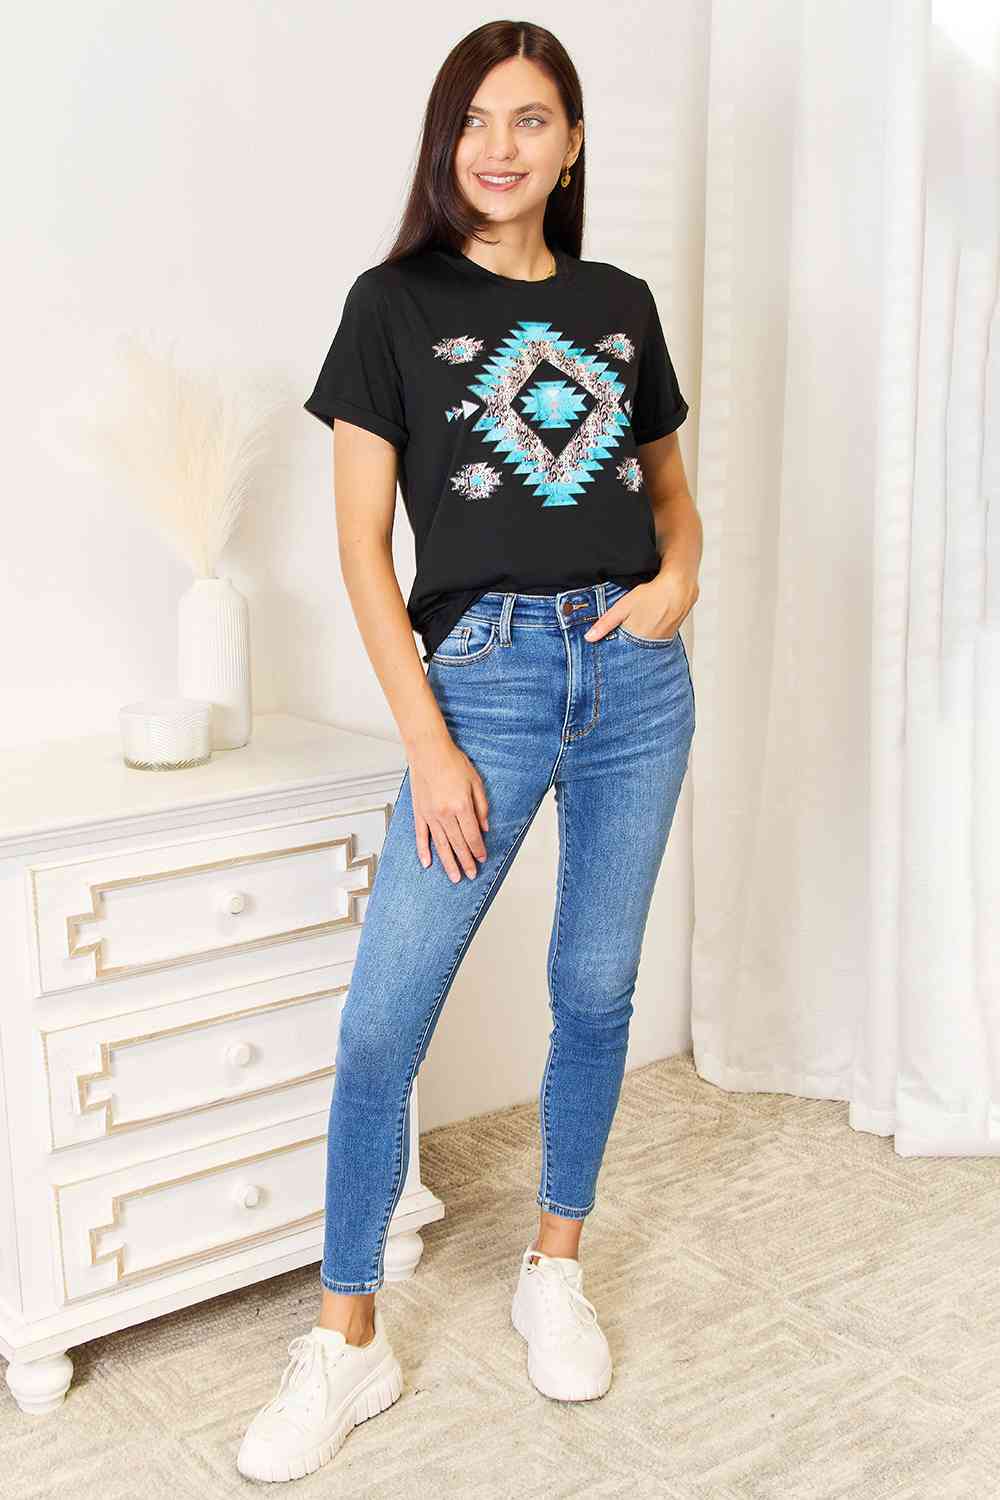 Simply Love Graphic Short Sleeve T-Shirt BLUE ZONE PLANET